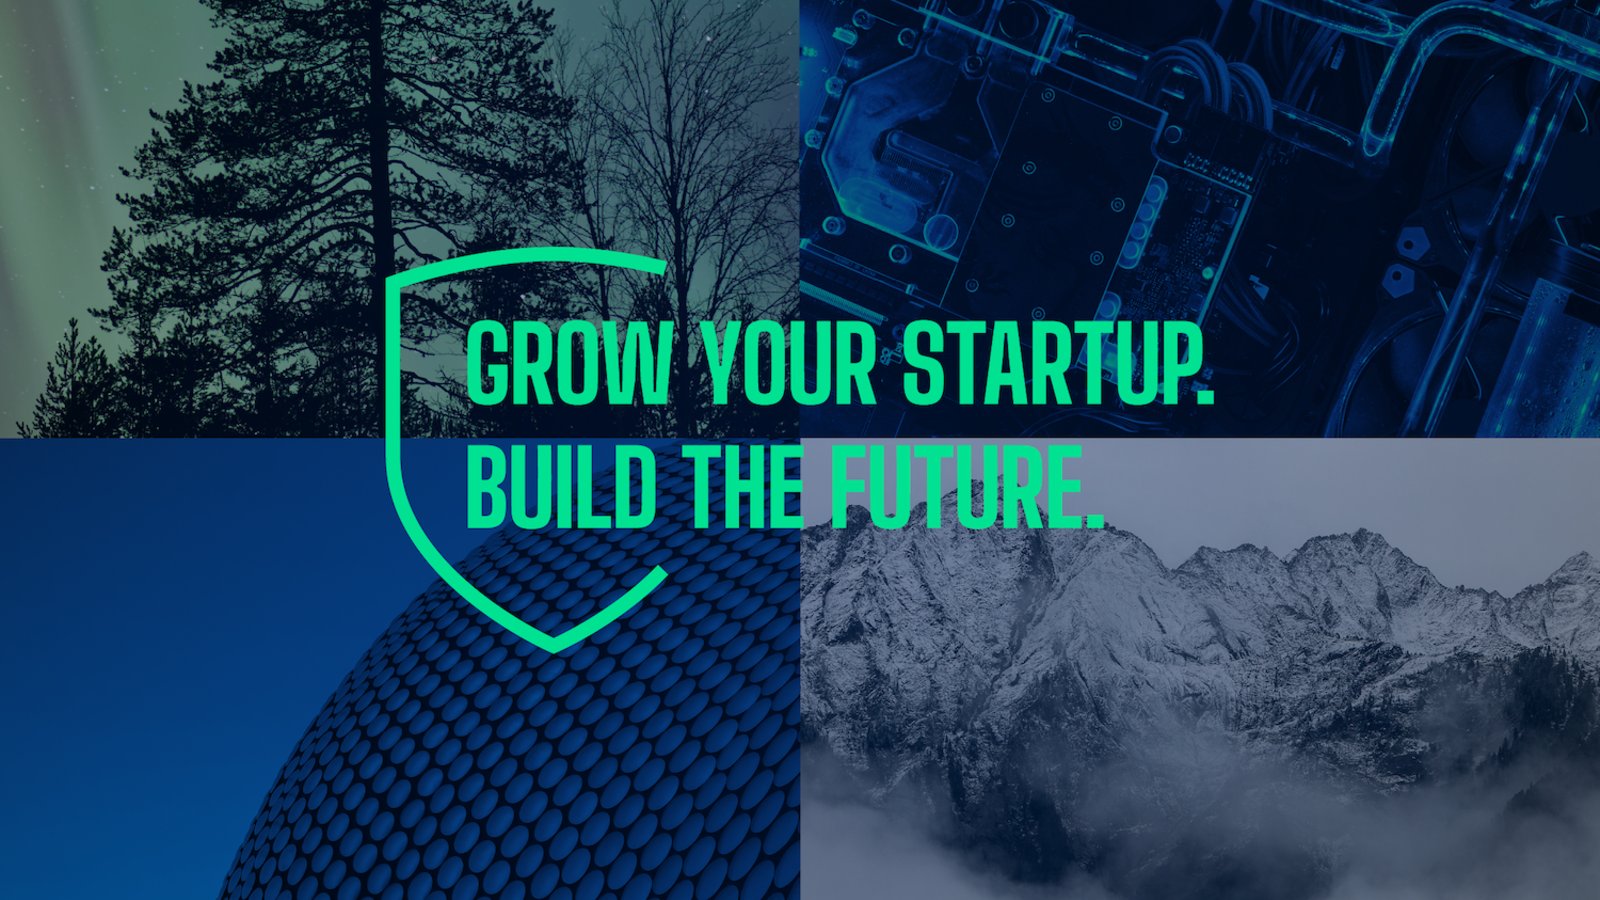 Grow your startup. Build the future. RBPC22